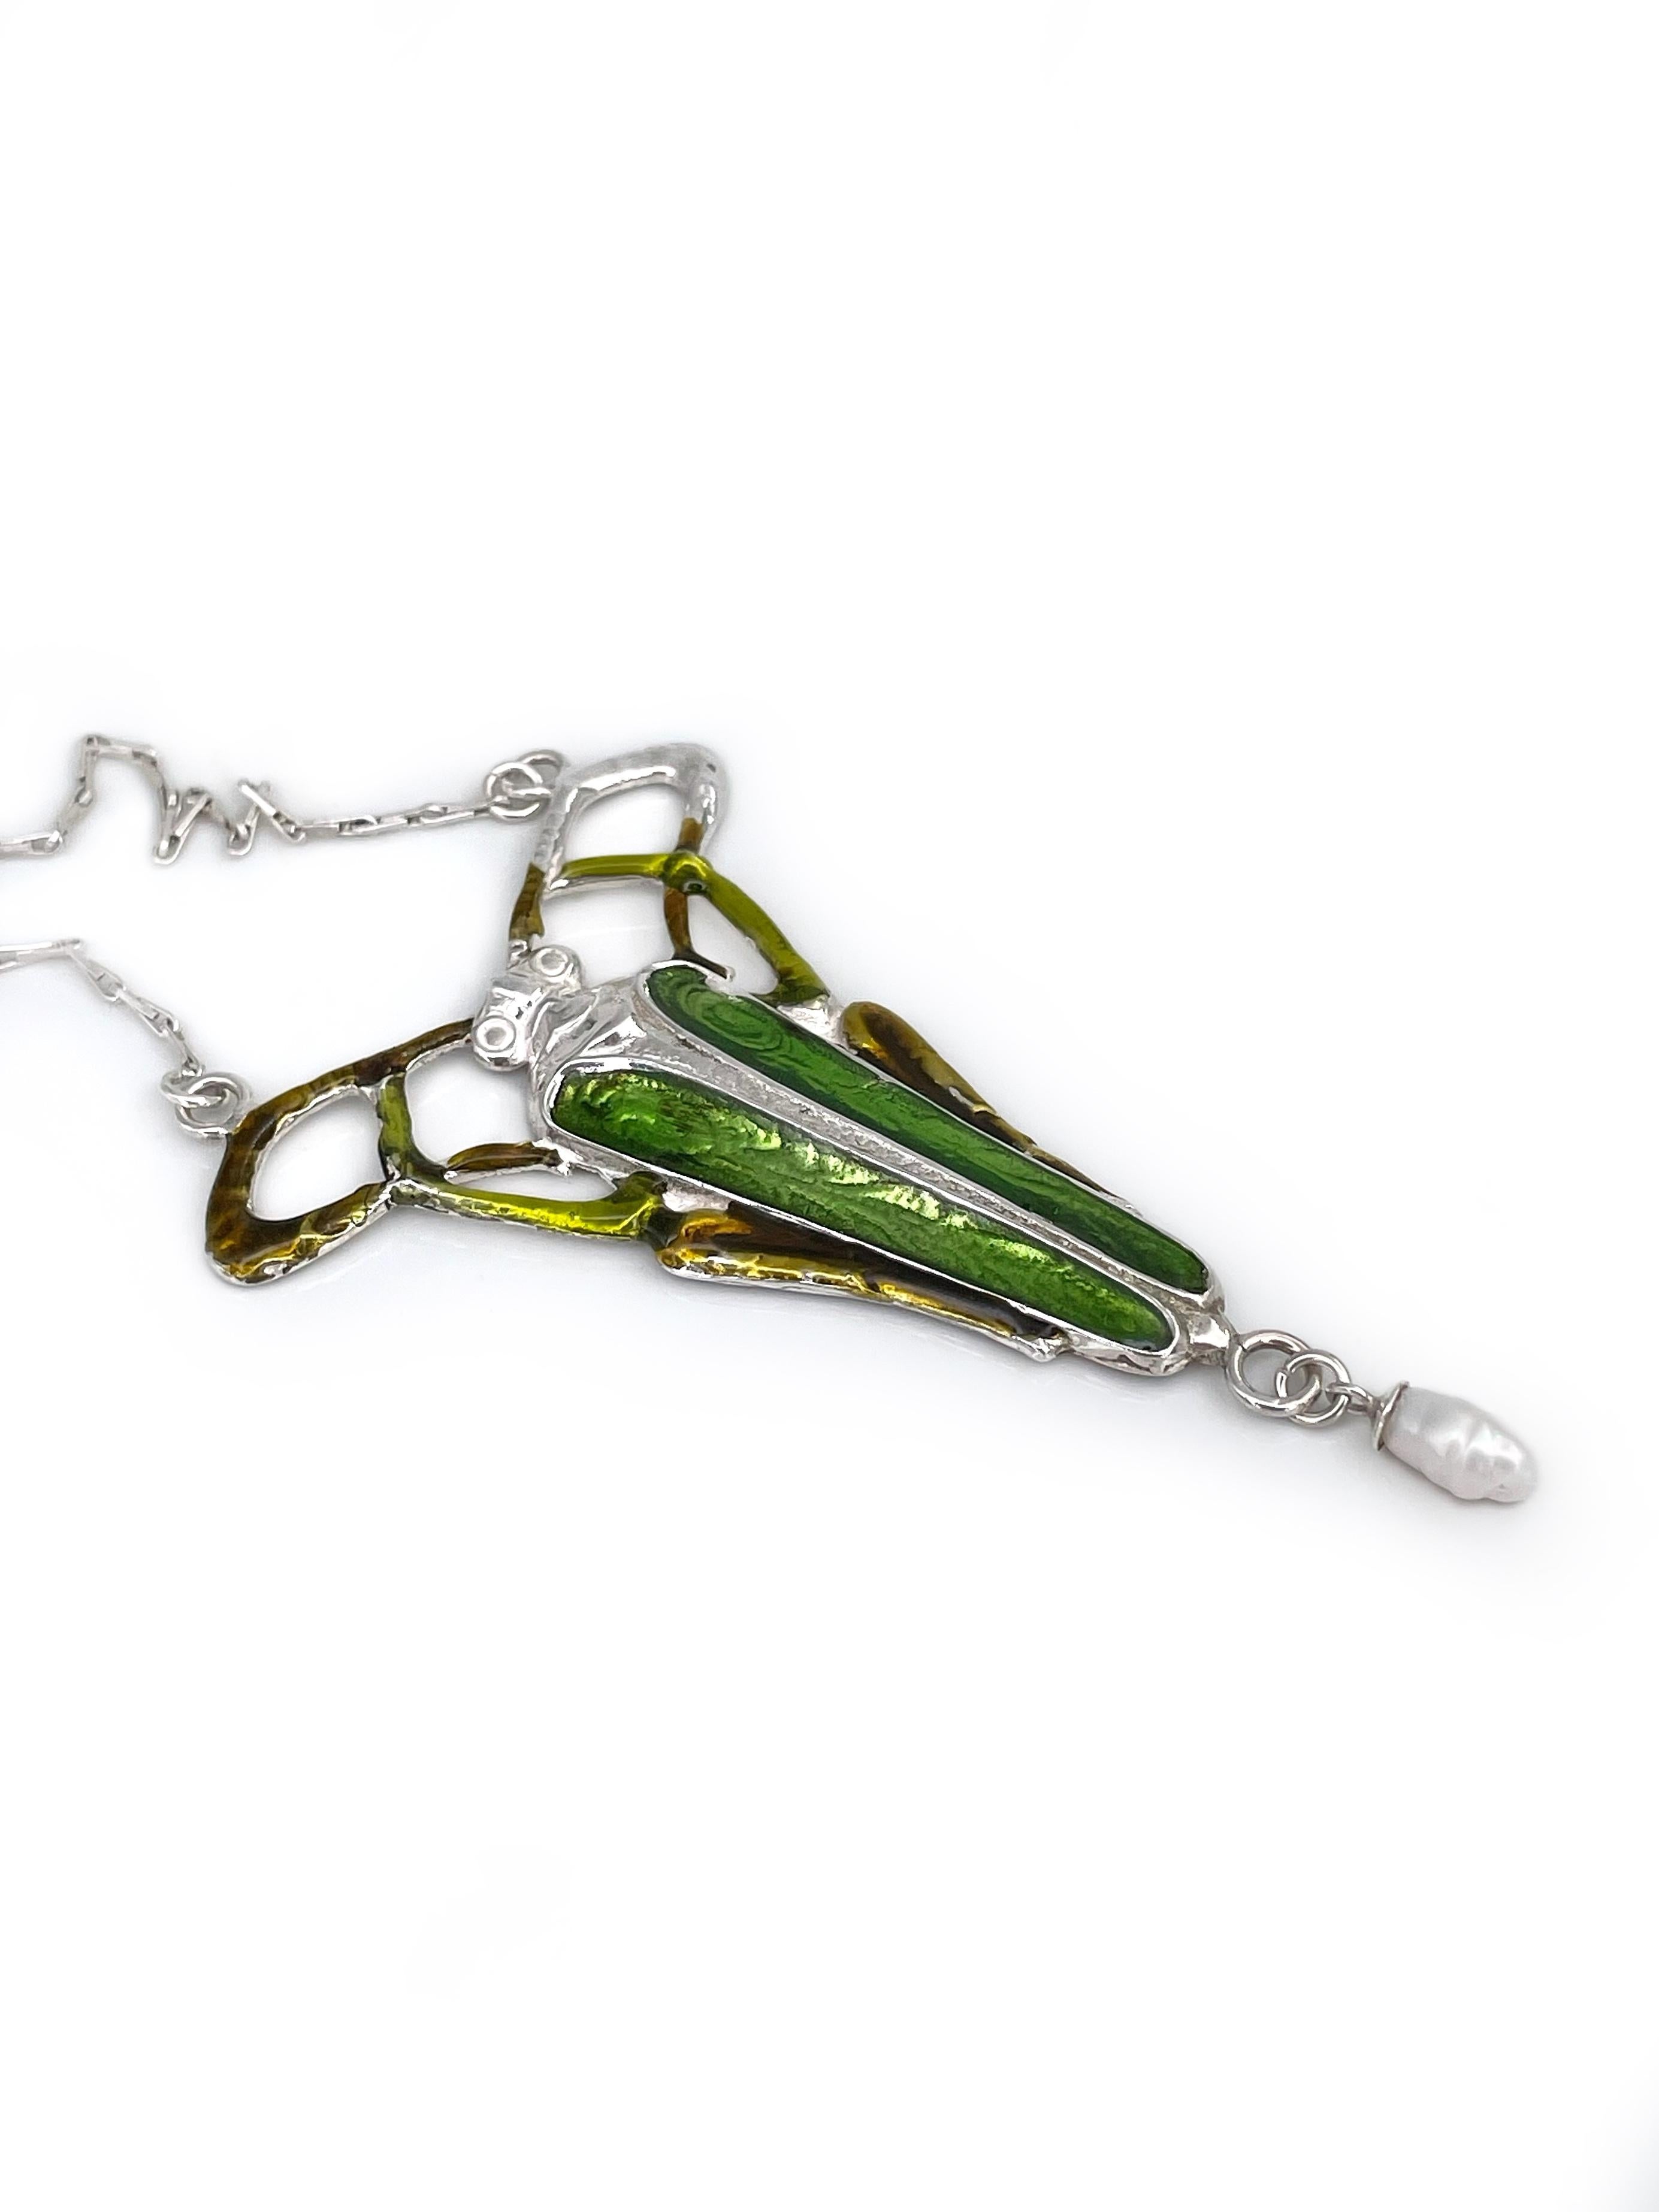 This is a lovely Art Nouveau style grasshopper pendant necklace crafted in 925 silver. It is adorned with green and brown enamel which is in average condition. The piece features a cultured circle pearl. 

Weight: 12.18g
Pendant size: